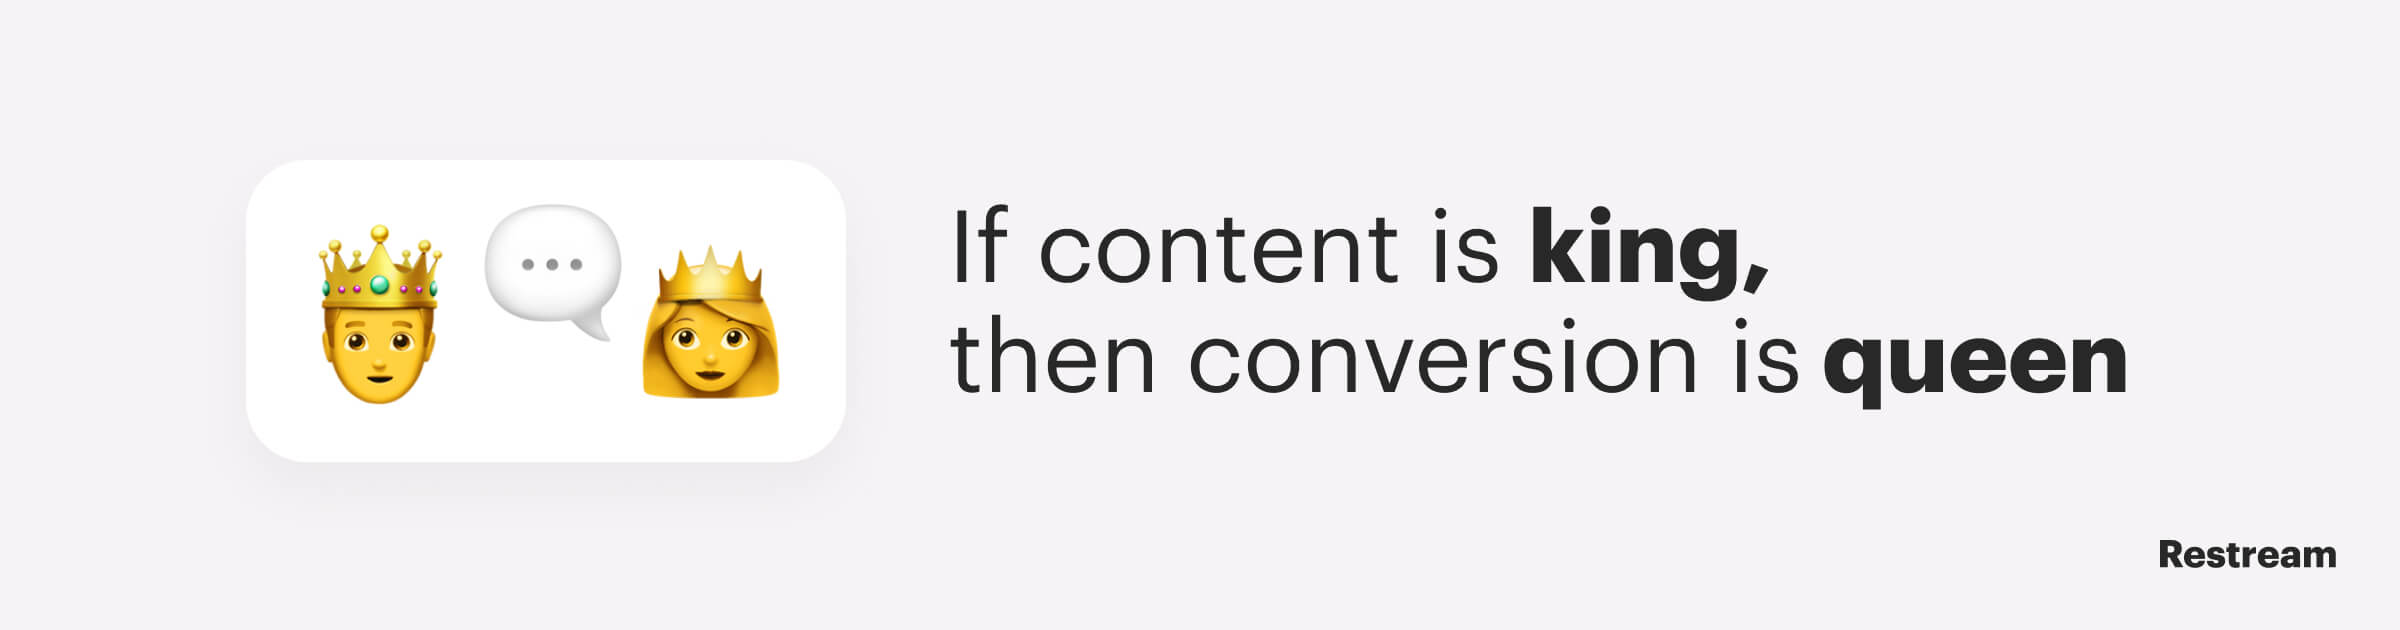 Content is king, conversion is qeen